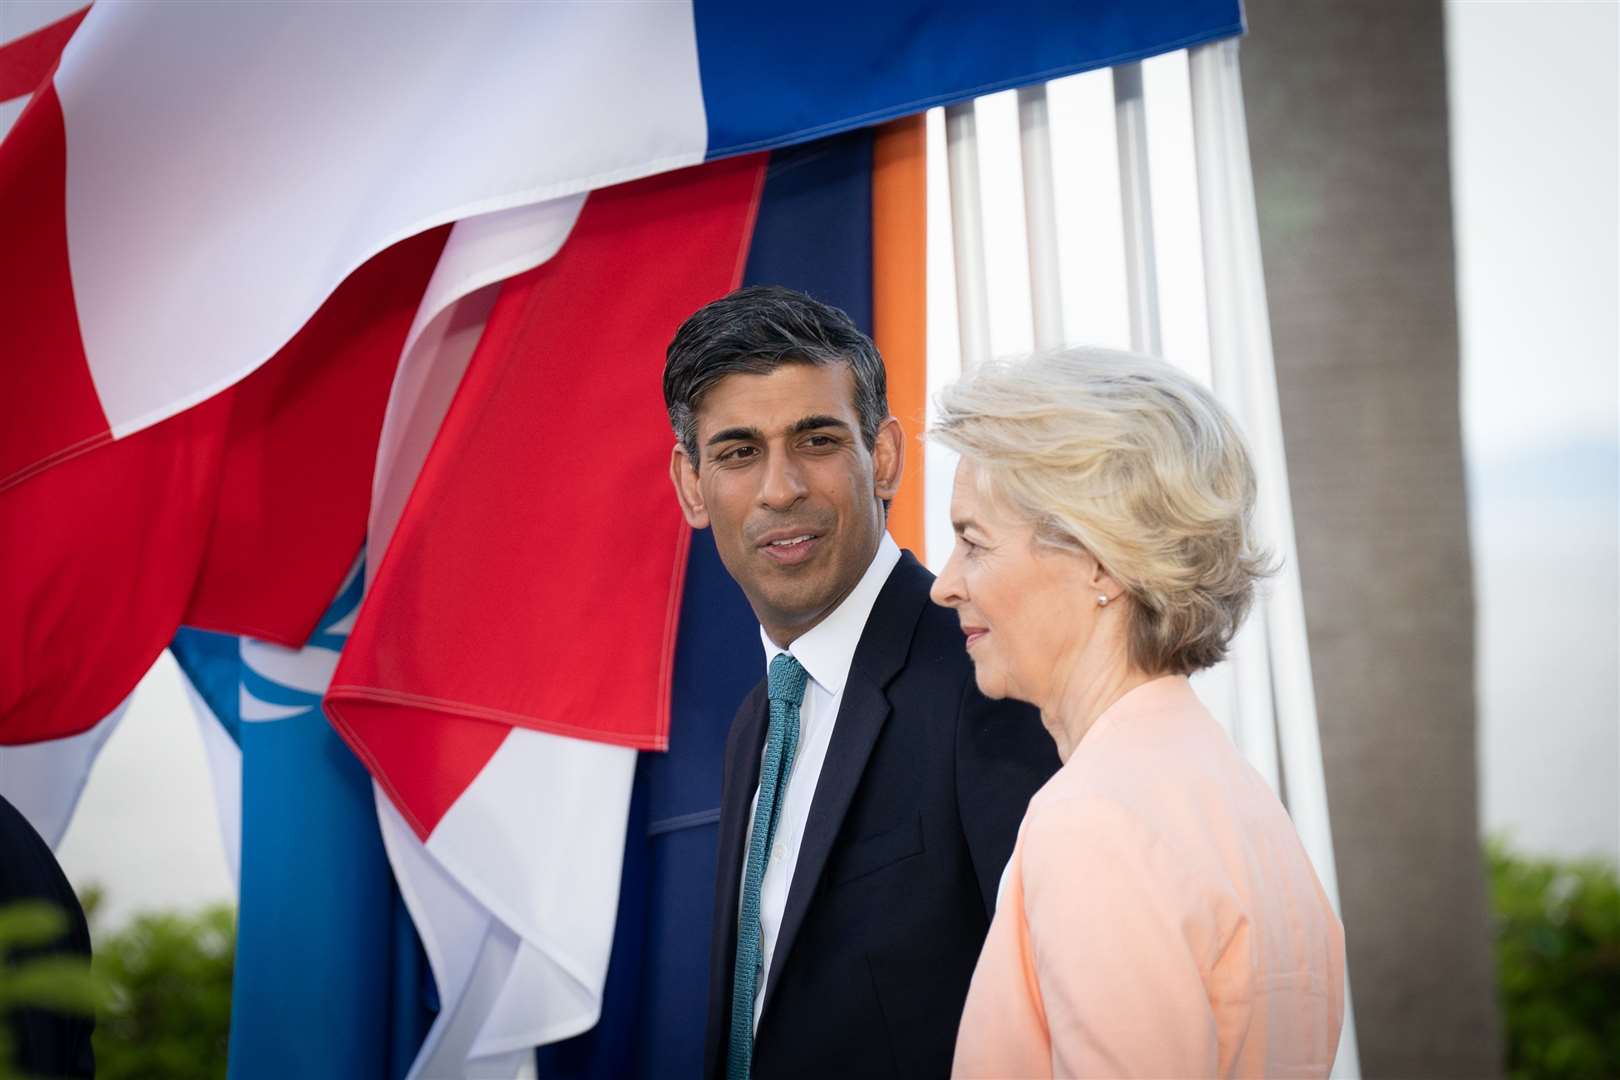 Mr Sunak and European Commission President Ursula von der Leyen hailed the Windsor Framework, though the DUP and others have raised concerns (Stefan Rousseau/PA)